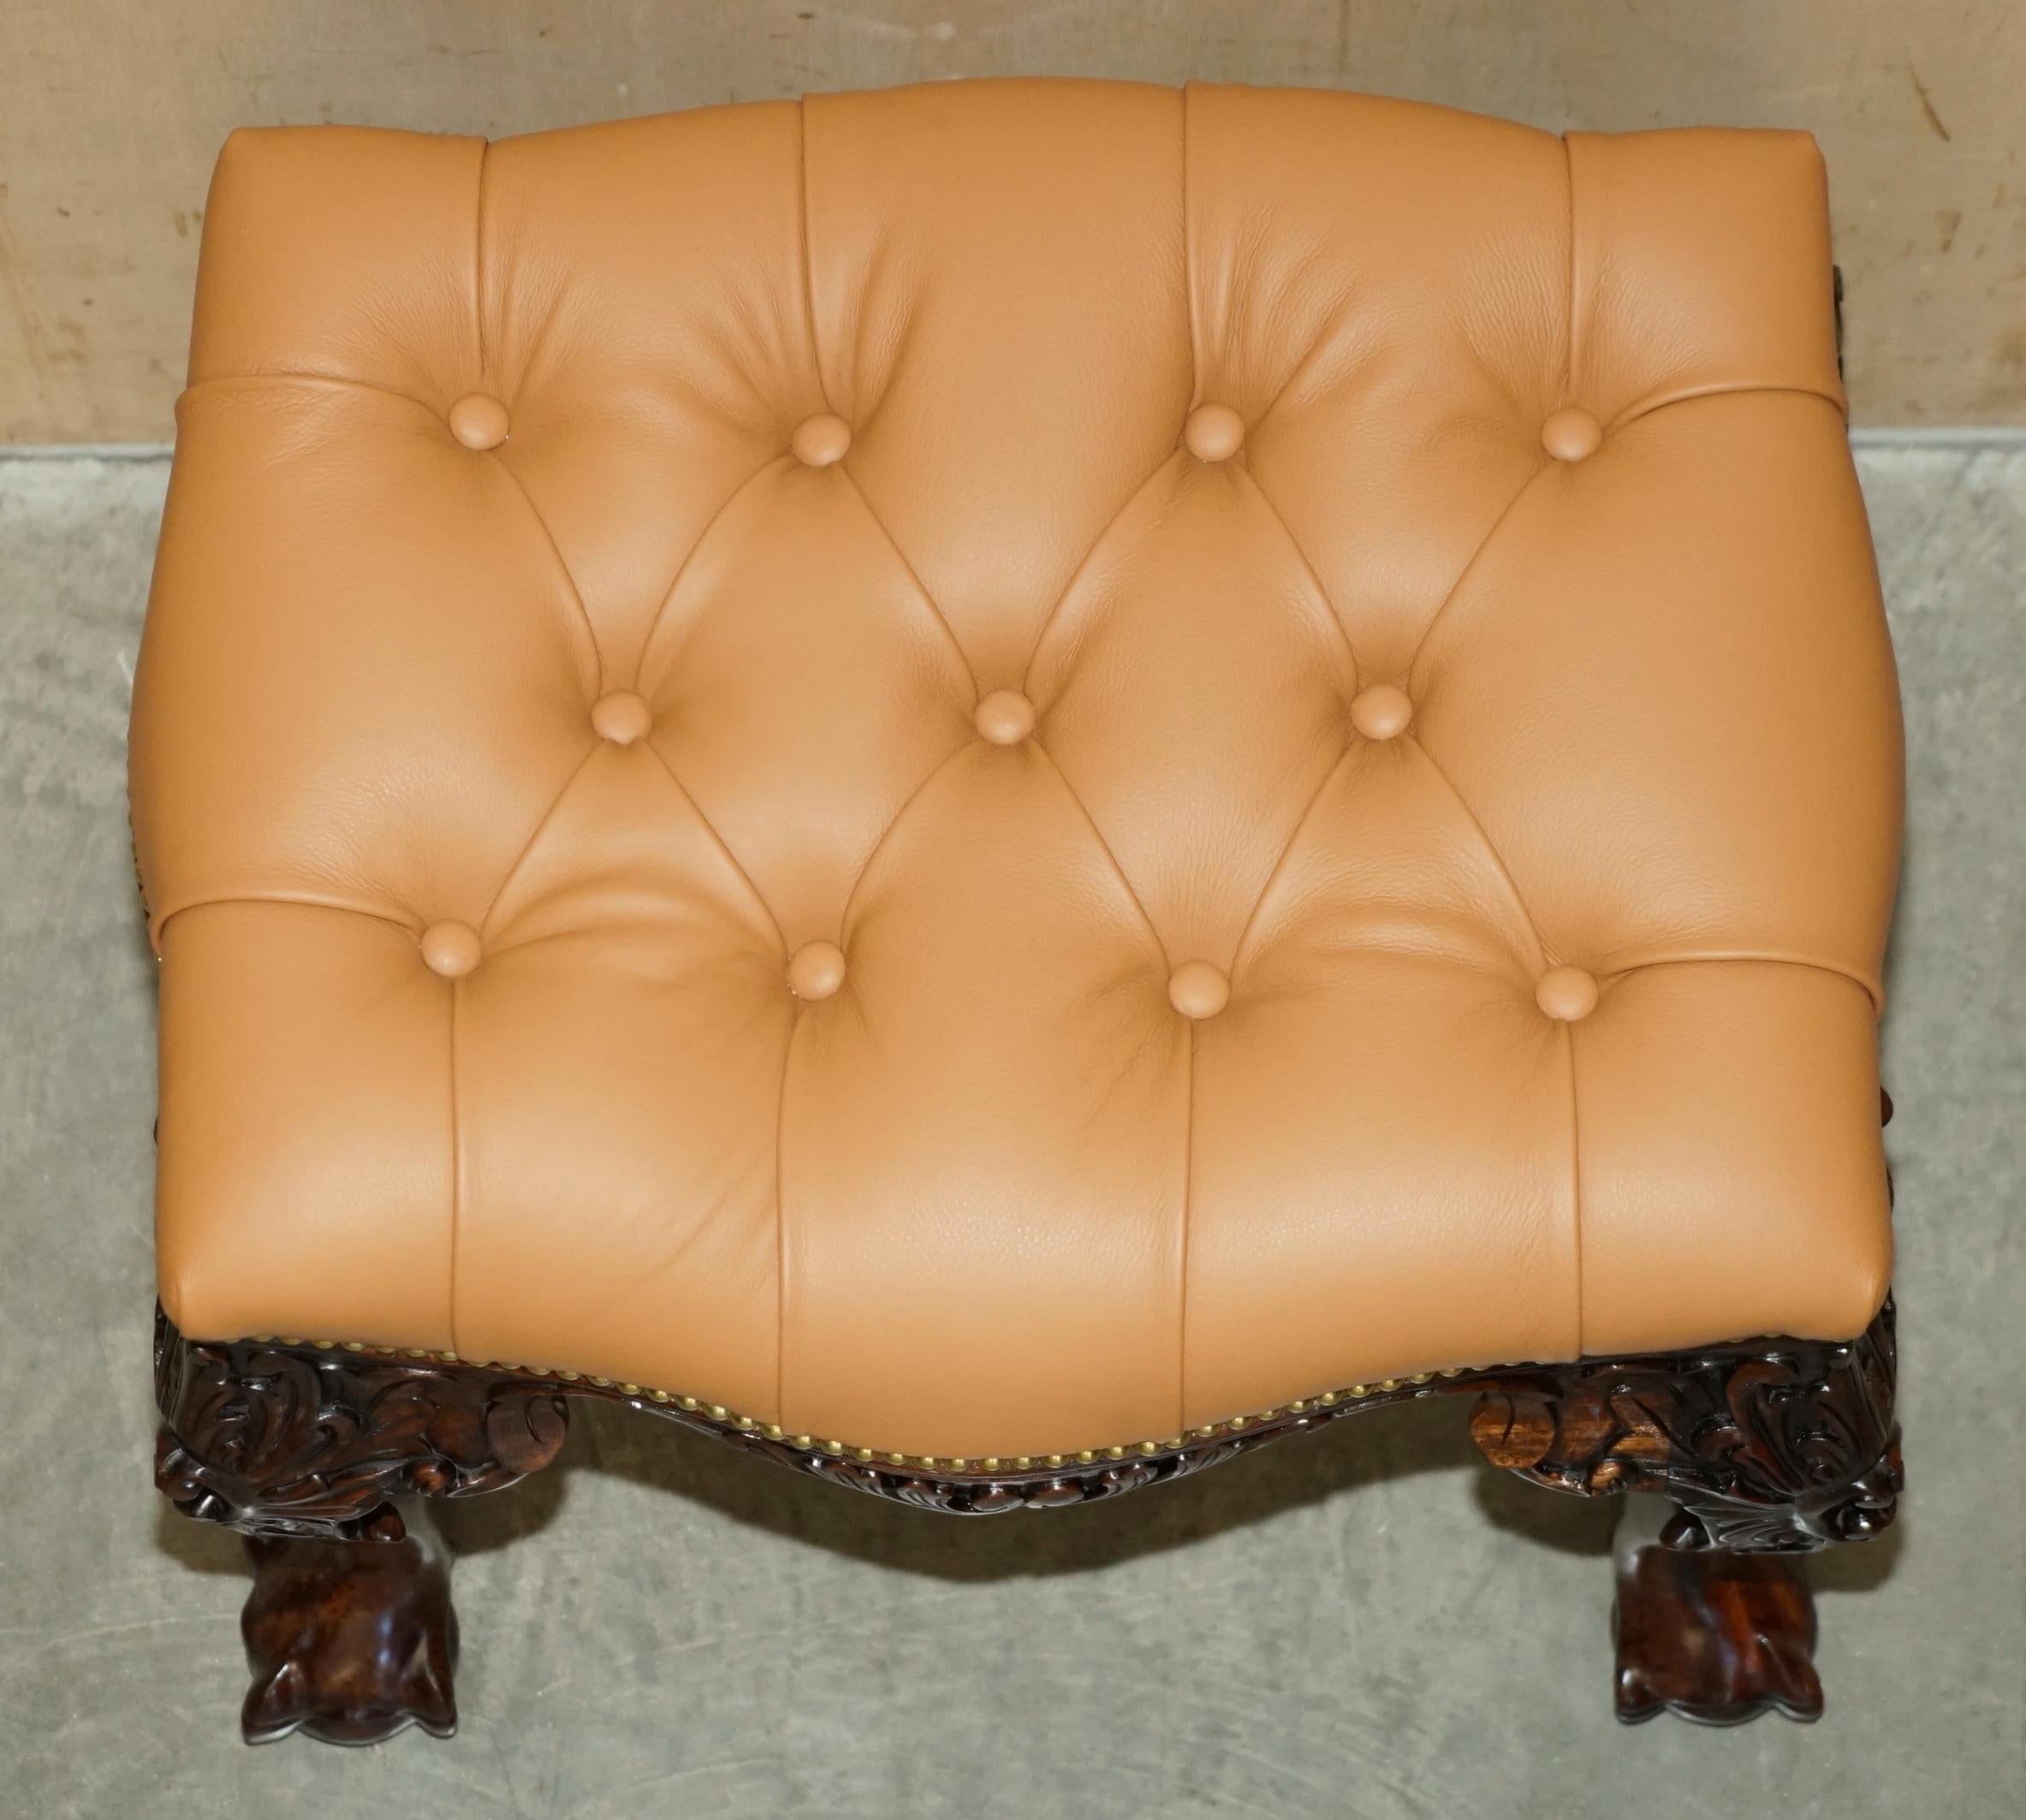 RESTORATED BROWN LEATHER CLAW & BALL CHESTERFIELD PIANO OR DRESSiNG TABLE STOOL im Angebot 6